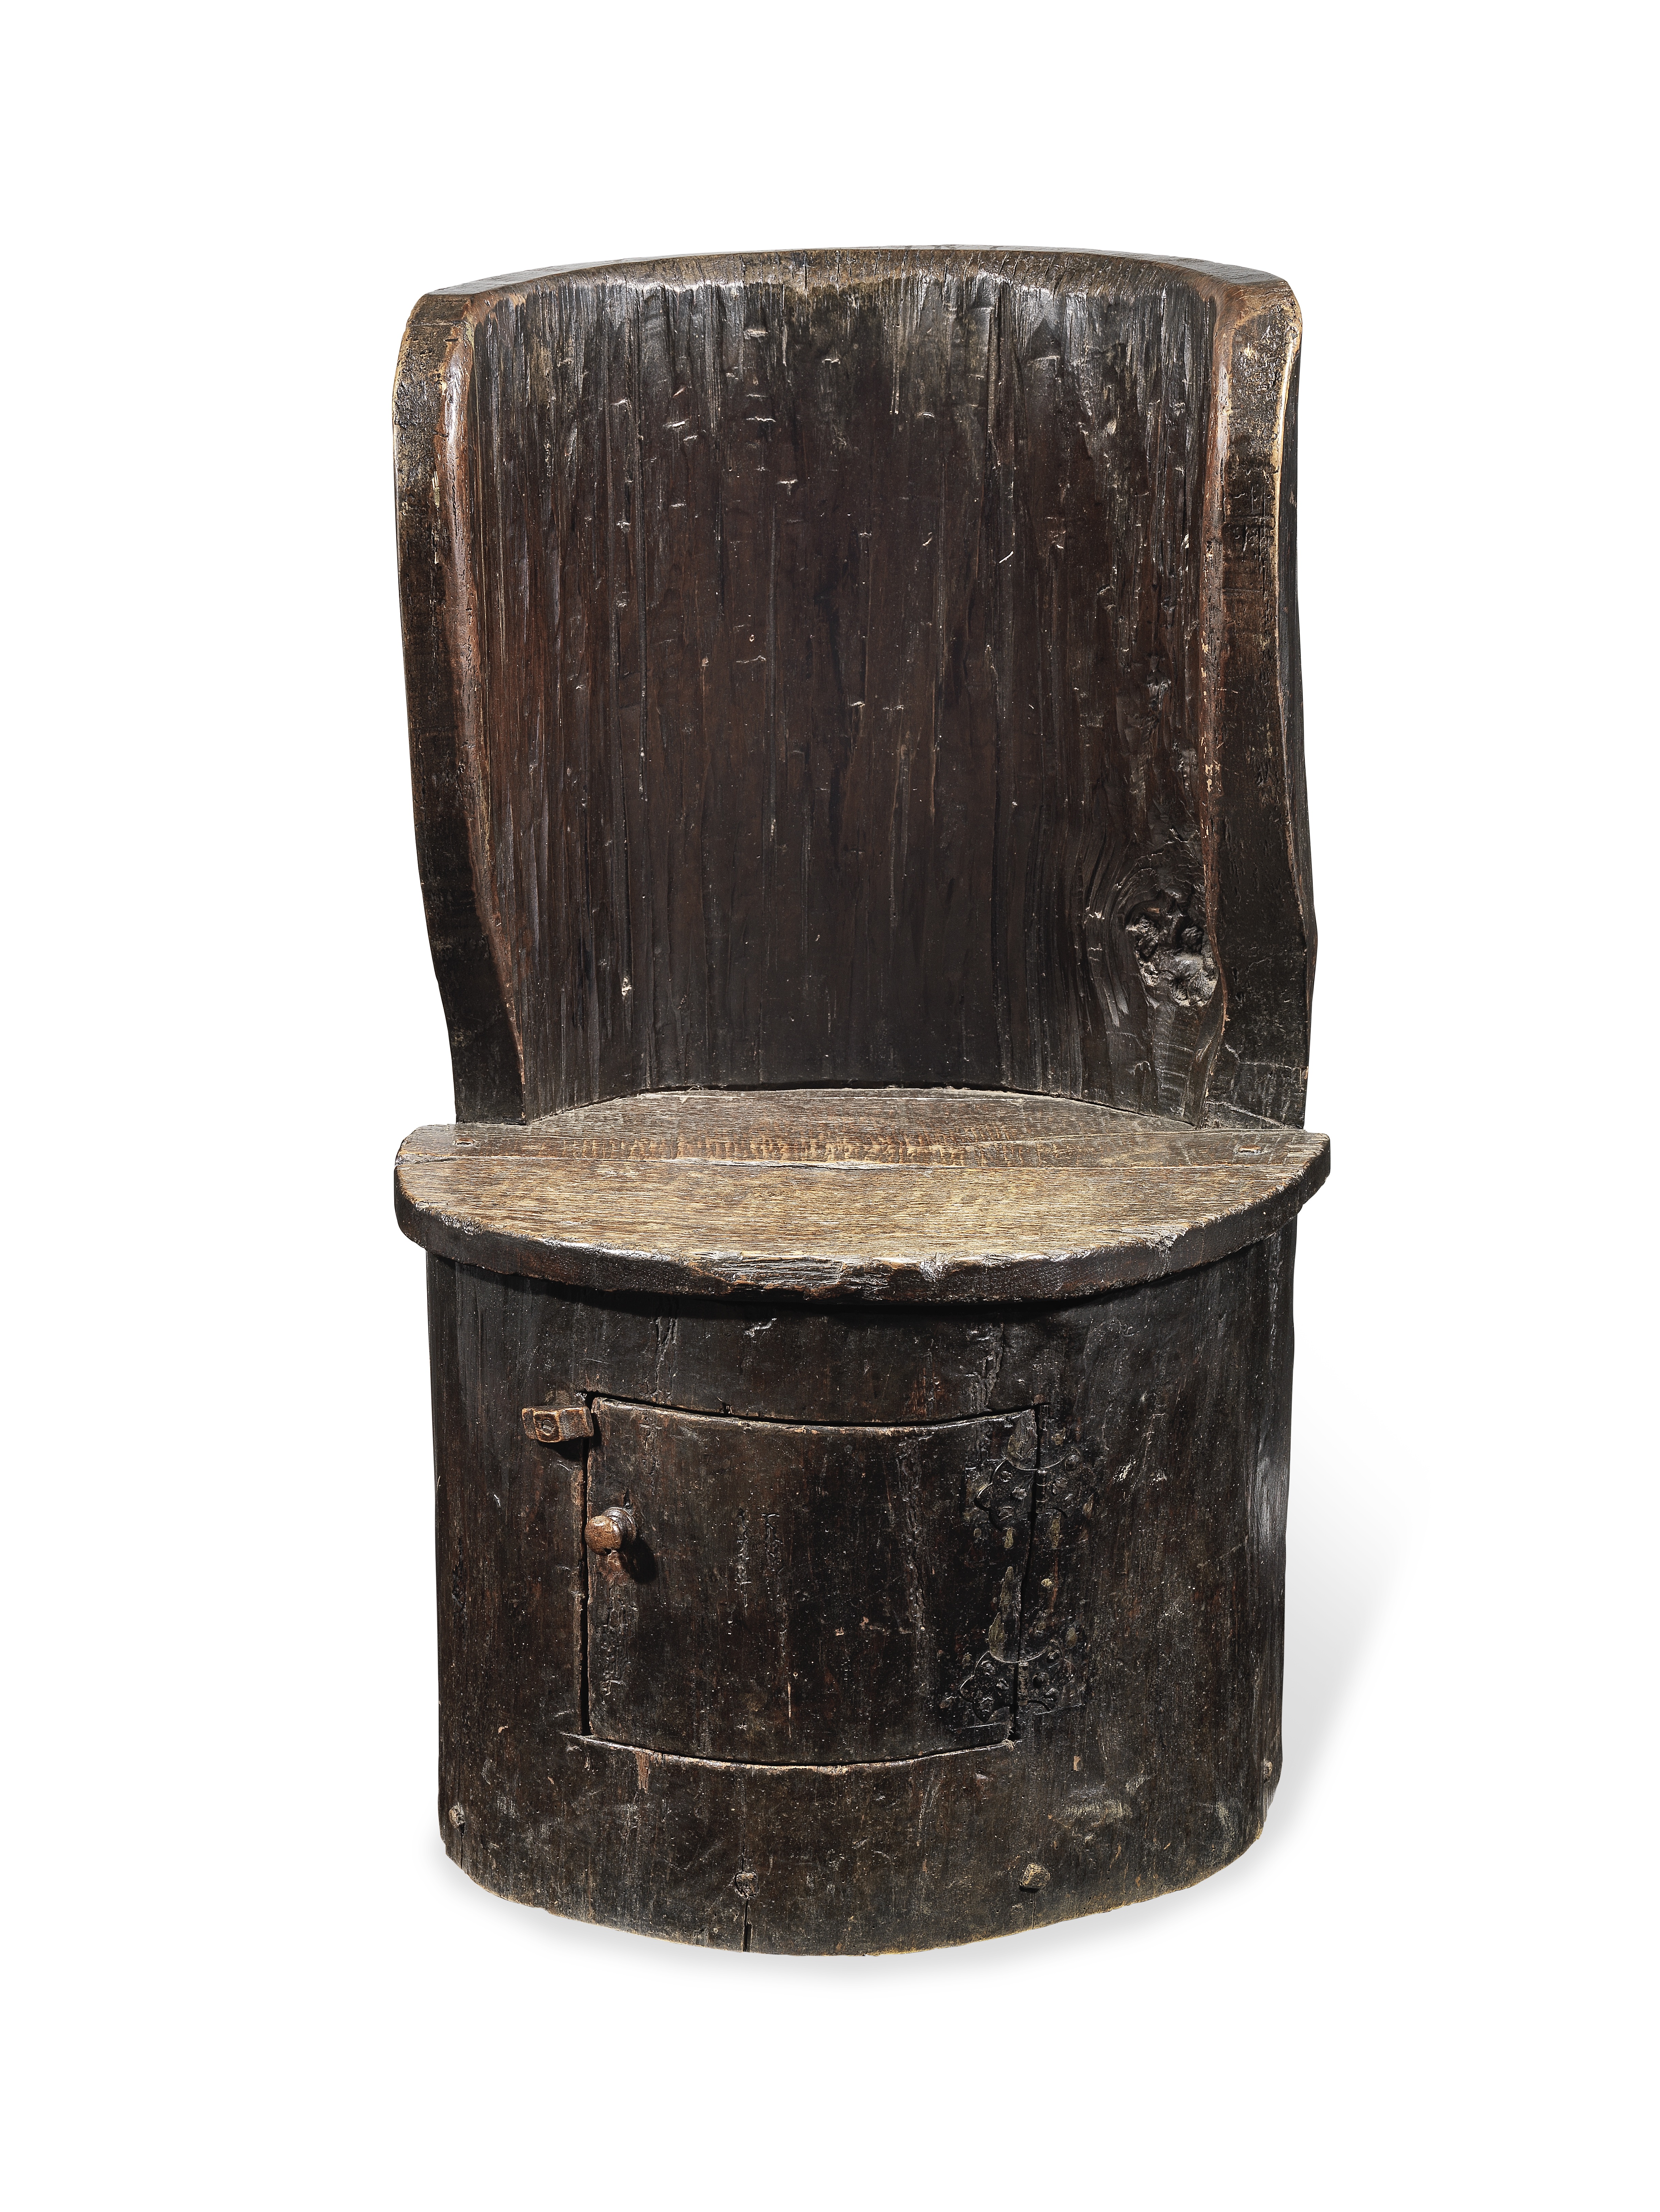 Am impressive 19th century dug-out chair, with cupboard base Stained beech and pine - Image 2 of 5